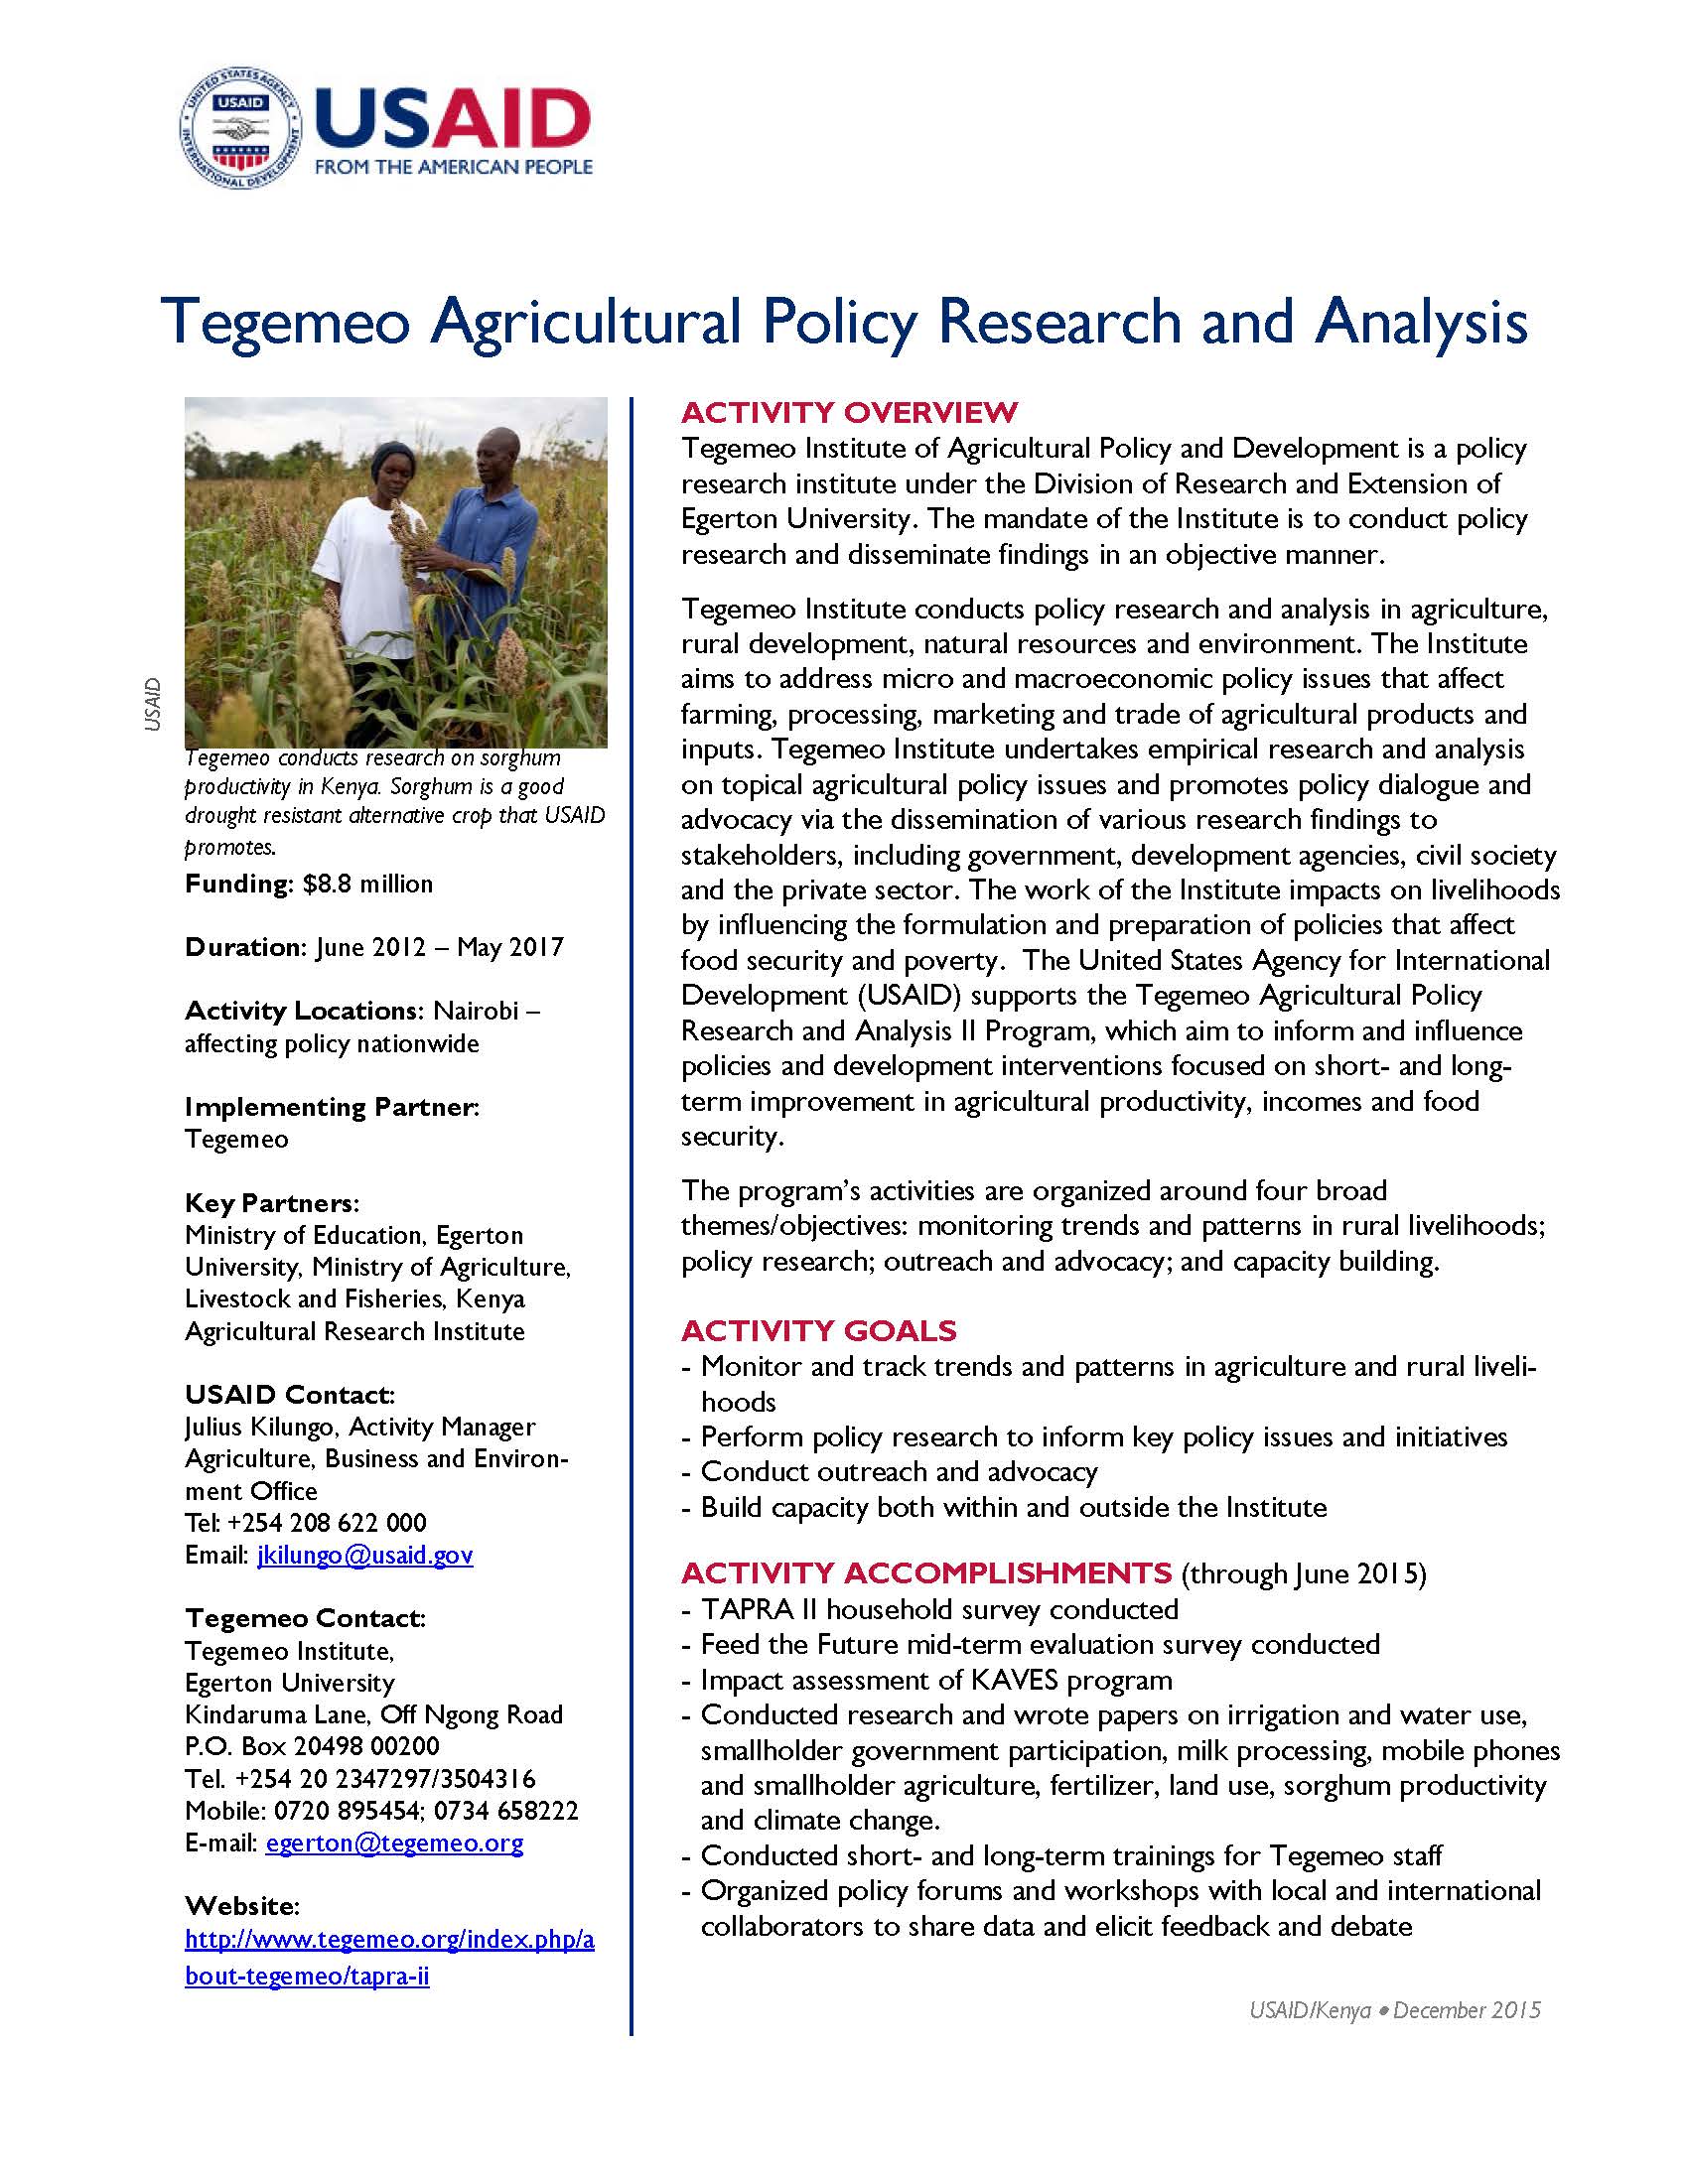 Tegemeo Agricultural Policy Research and Analysis